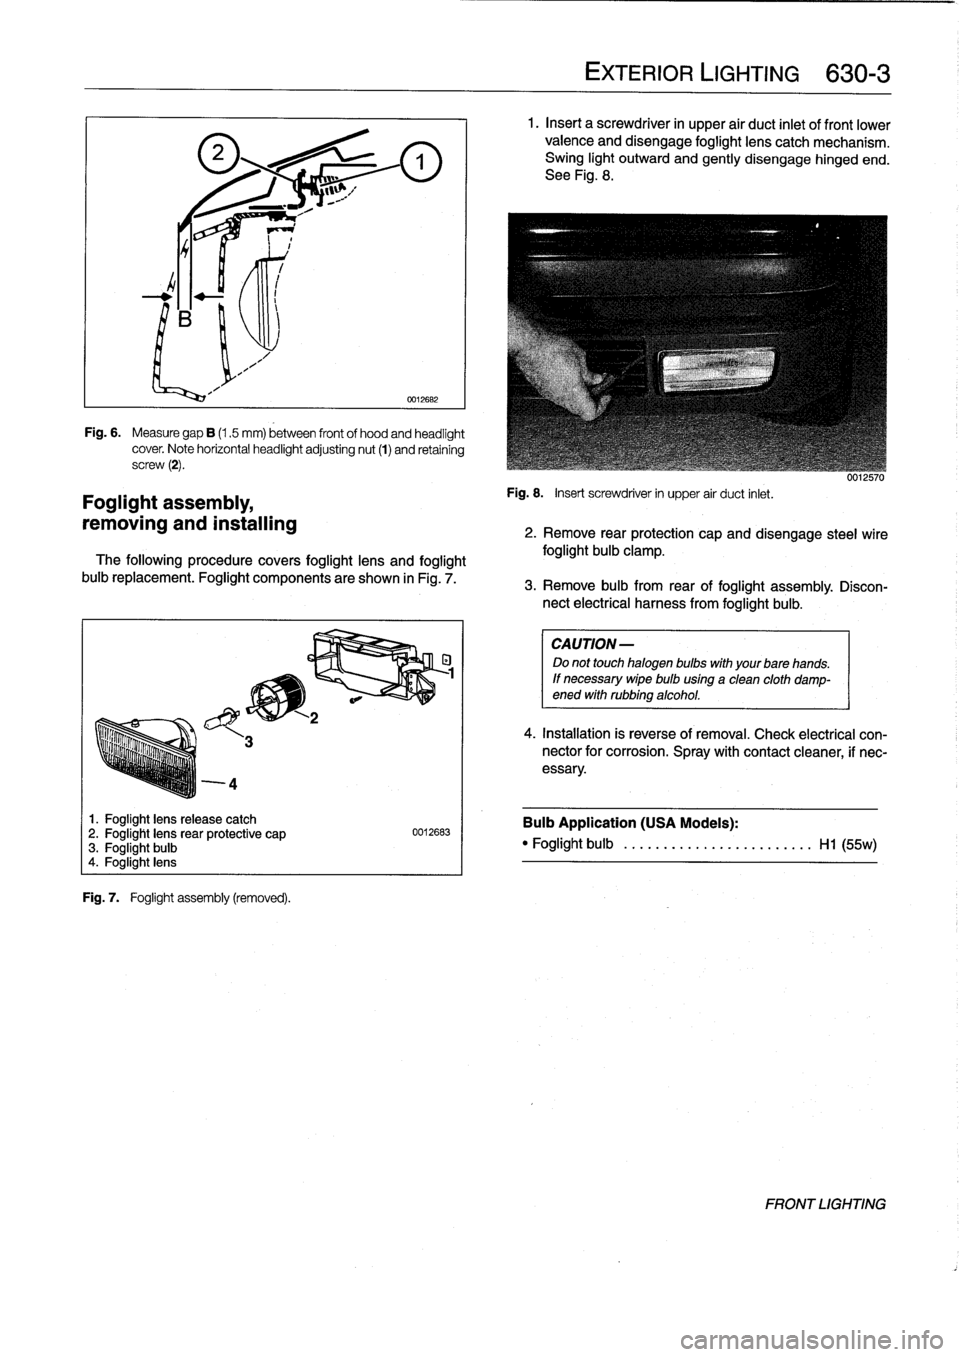 BMW 318i 1998 E36 Owners Manual 4

Foglight
assembly,

removing
and
installing

1
.
Foglight
lens
release
catch
2
.
Foglight
lensrear
protective
cap
3
.
Foglight
bulb
4
.
Foglight
lens

Fig
.
7
.

	

Foglight
assembly
(removed)
.

0